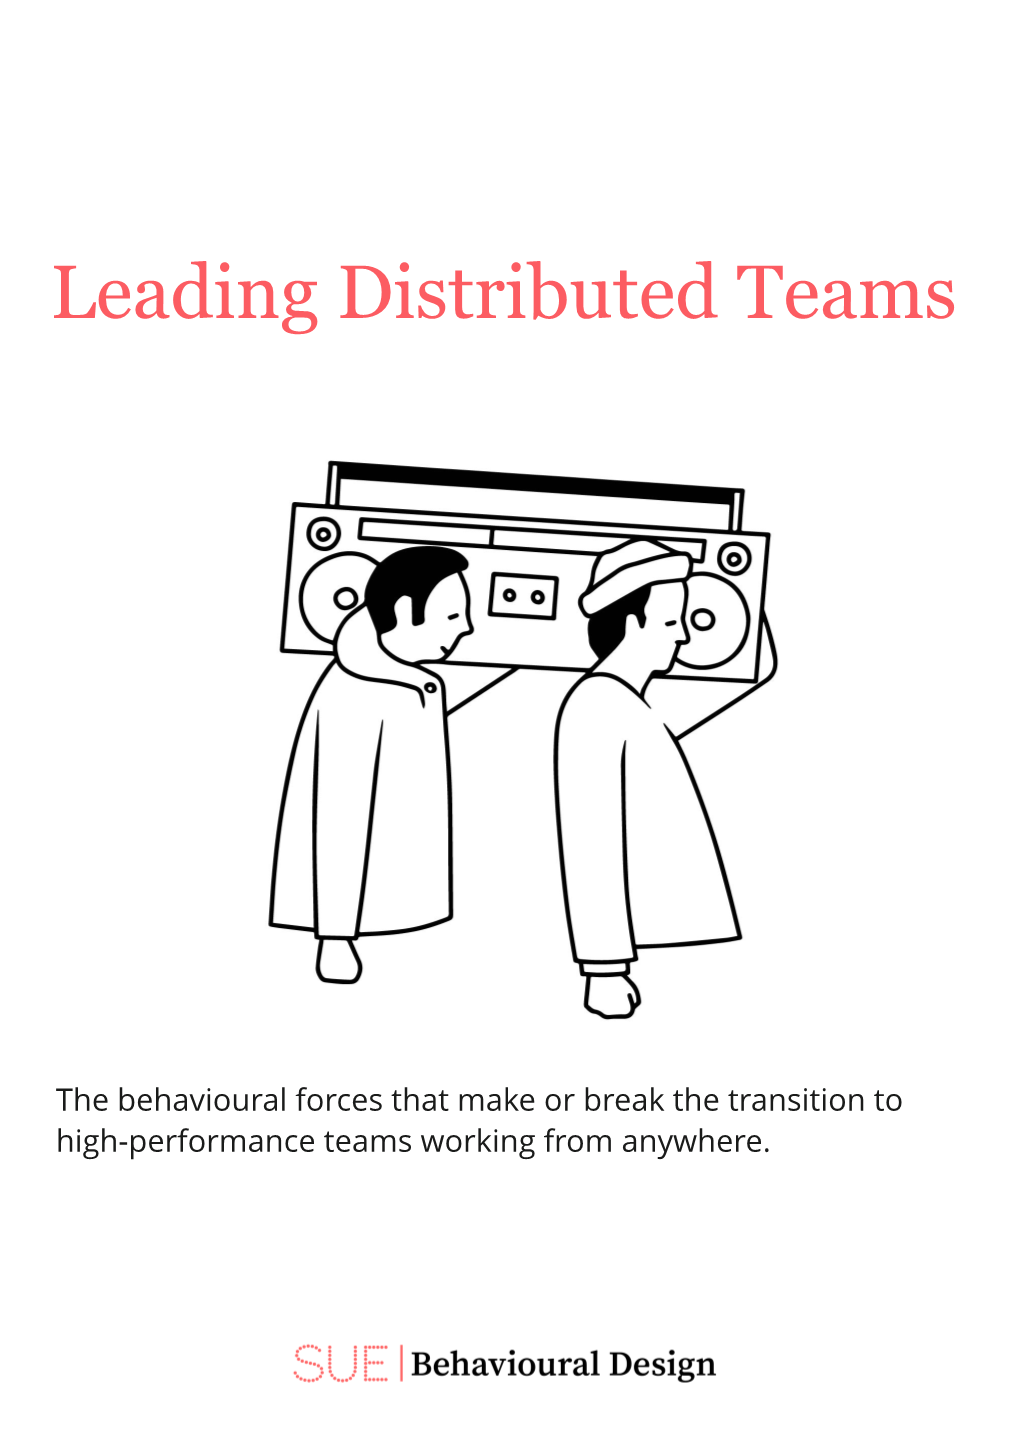 Leading Distributed Teams